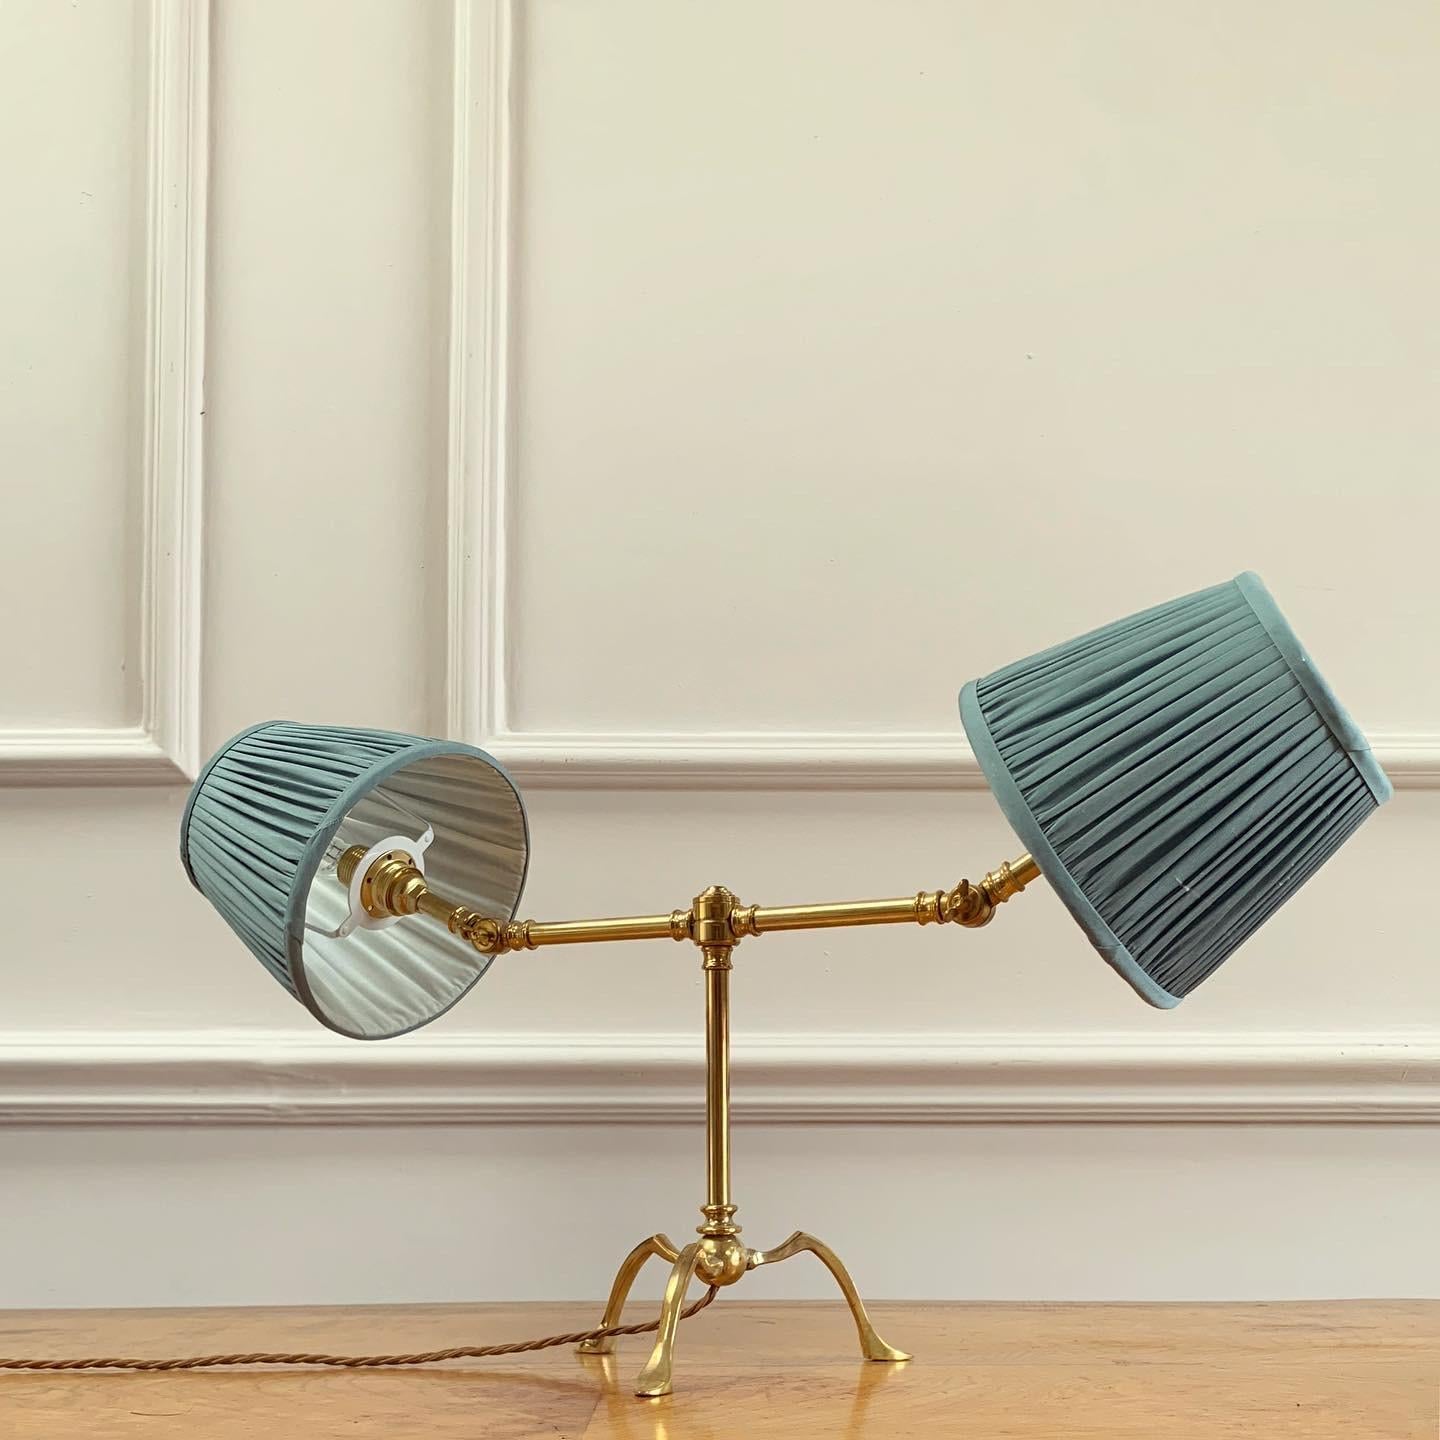 A brass table or reading lamp with adjustable twin arm bulb holders and stem supported on a tripod base - this design inspired by the arts and crafts legendary designer W.A.S Benson.

Shown with antique linen pleated lampshades - available